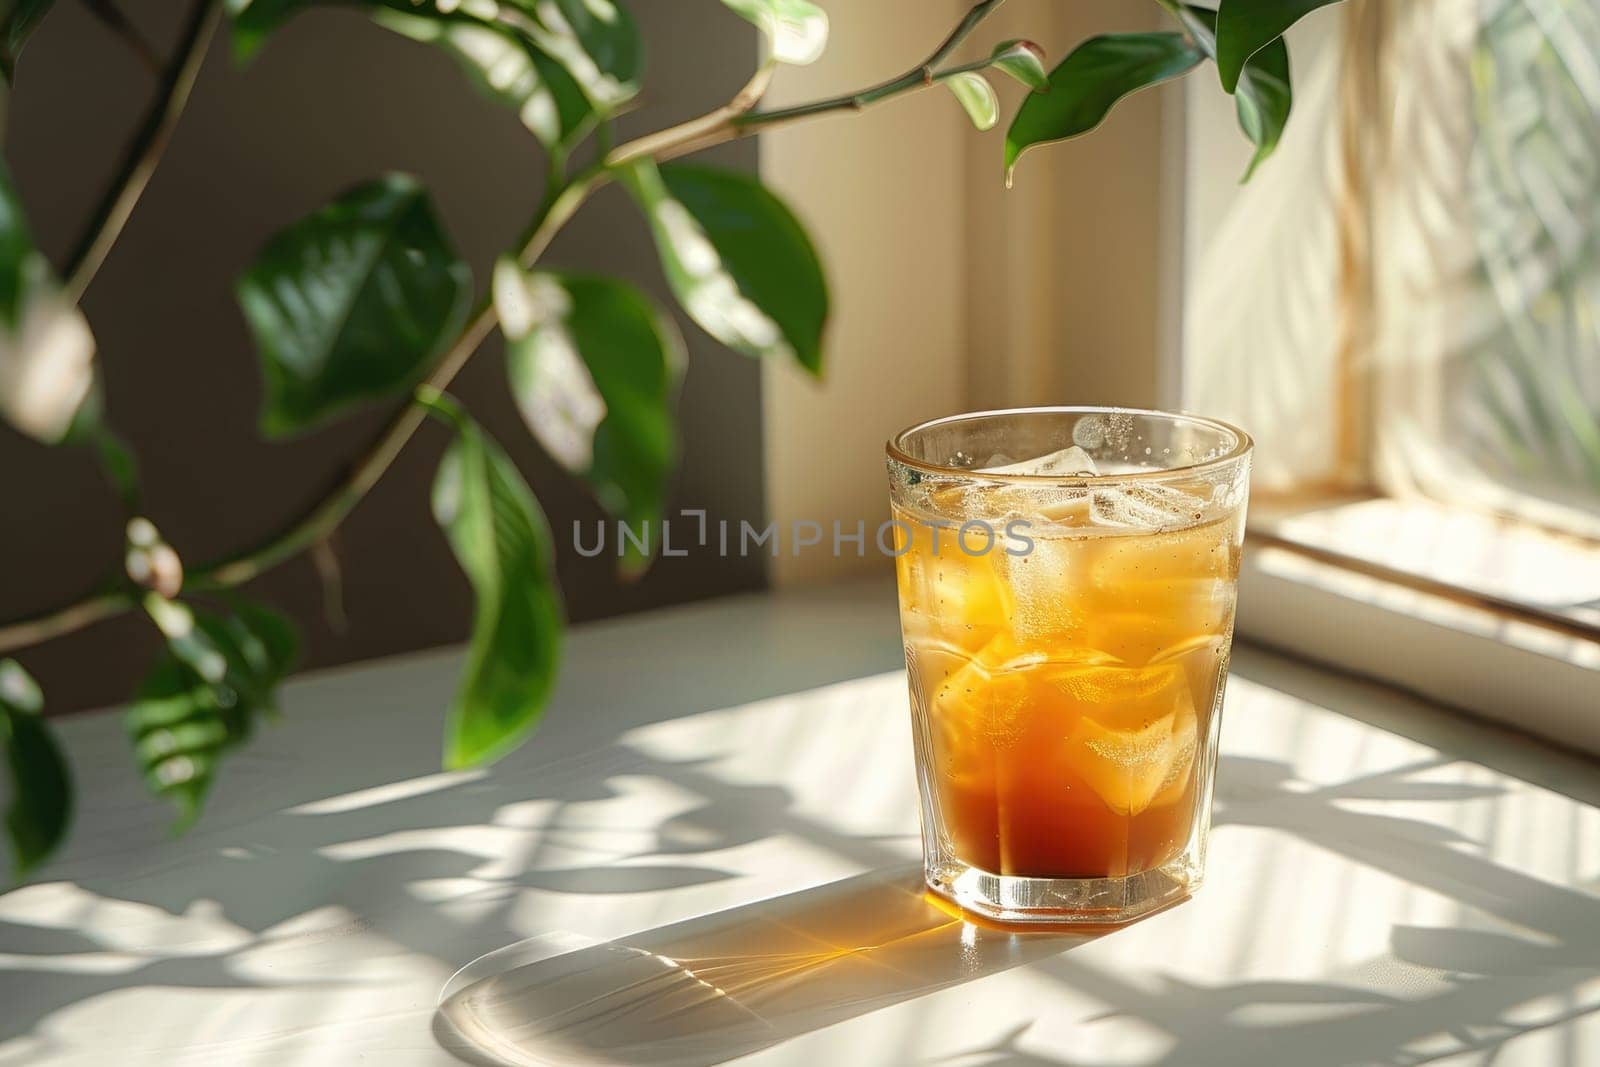 A glass of iced black coffee on white background with plant and clean composition, Minimal style by nijieimu